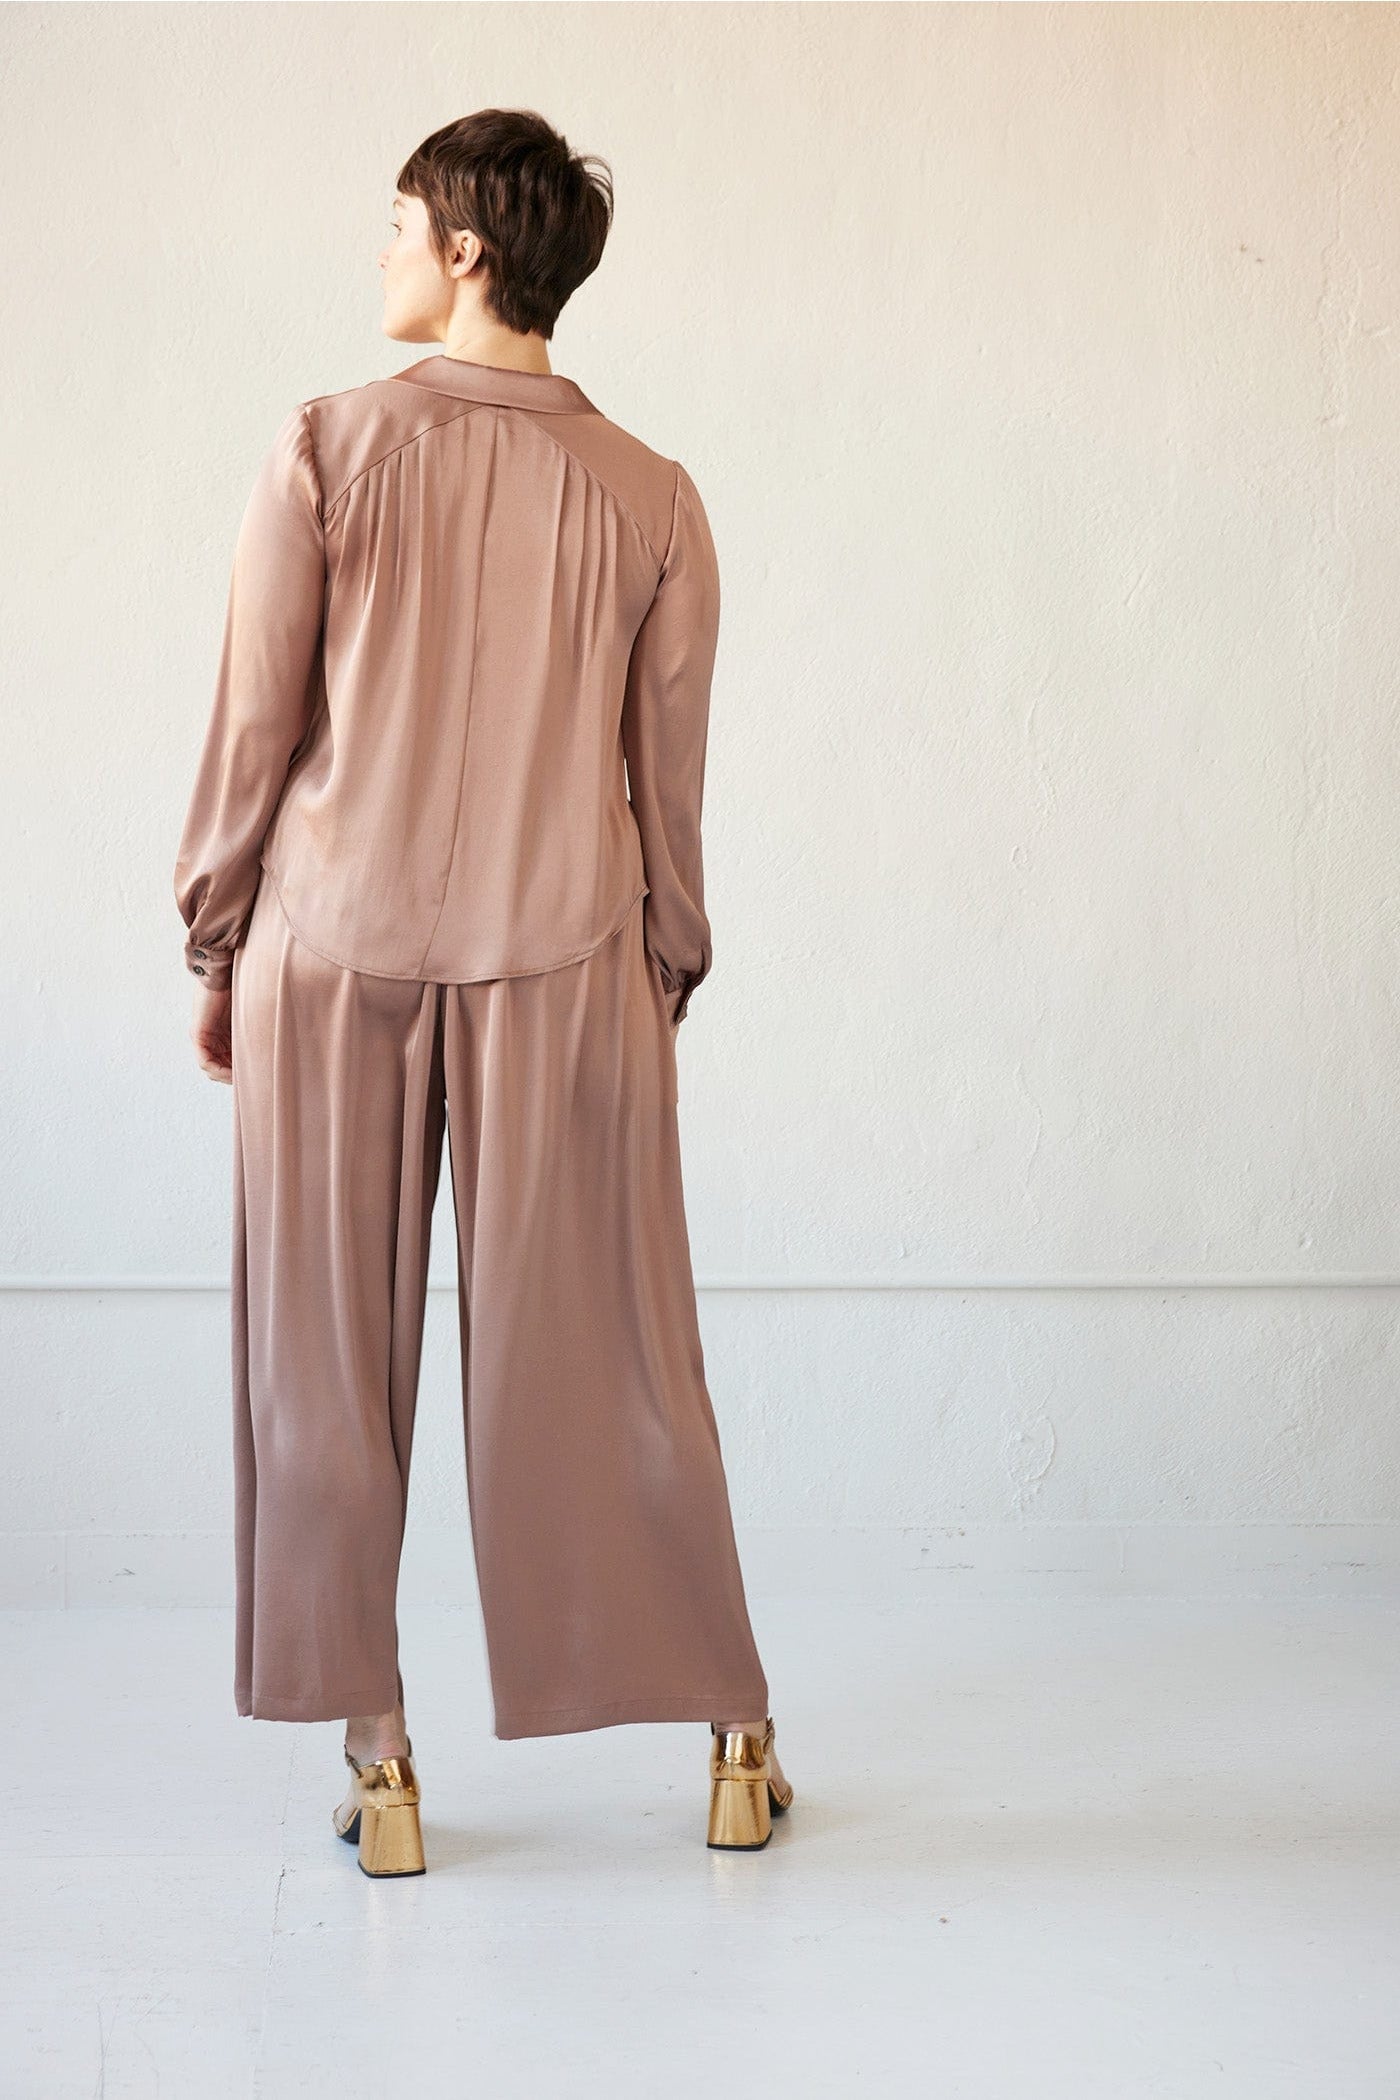 Gretchen Pant in Japanese Charmeuse Pants CHRISTINE ALCALAY   